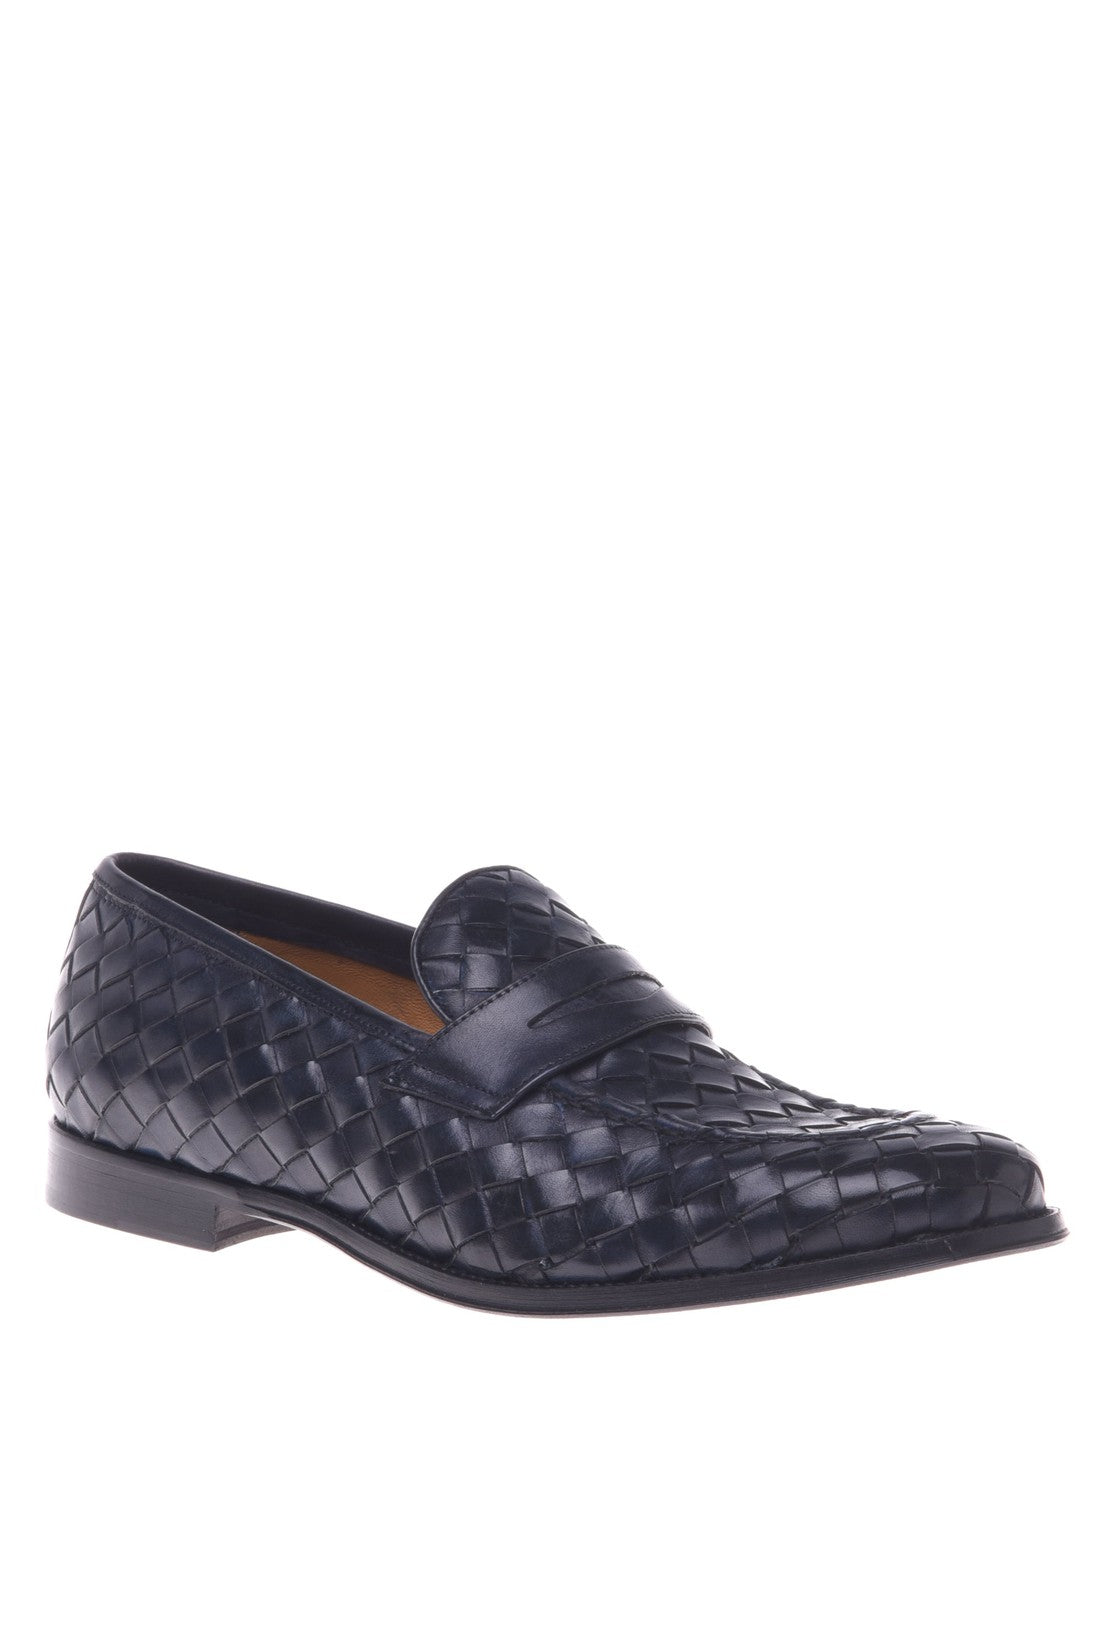 Blue woven leather loafer